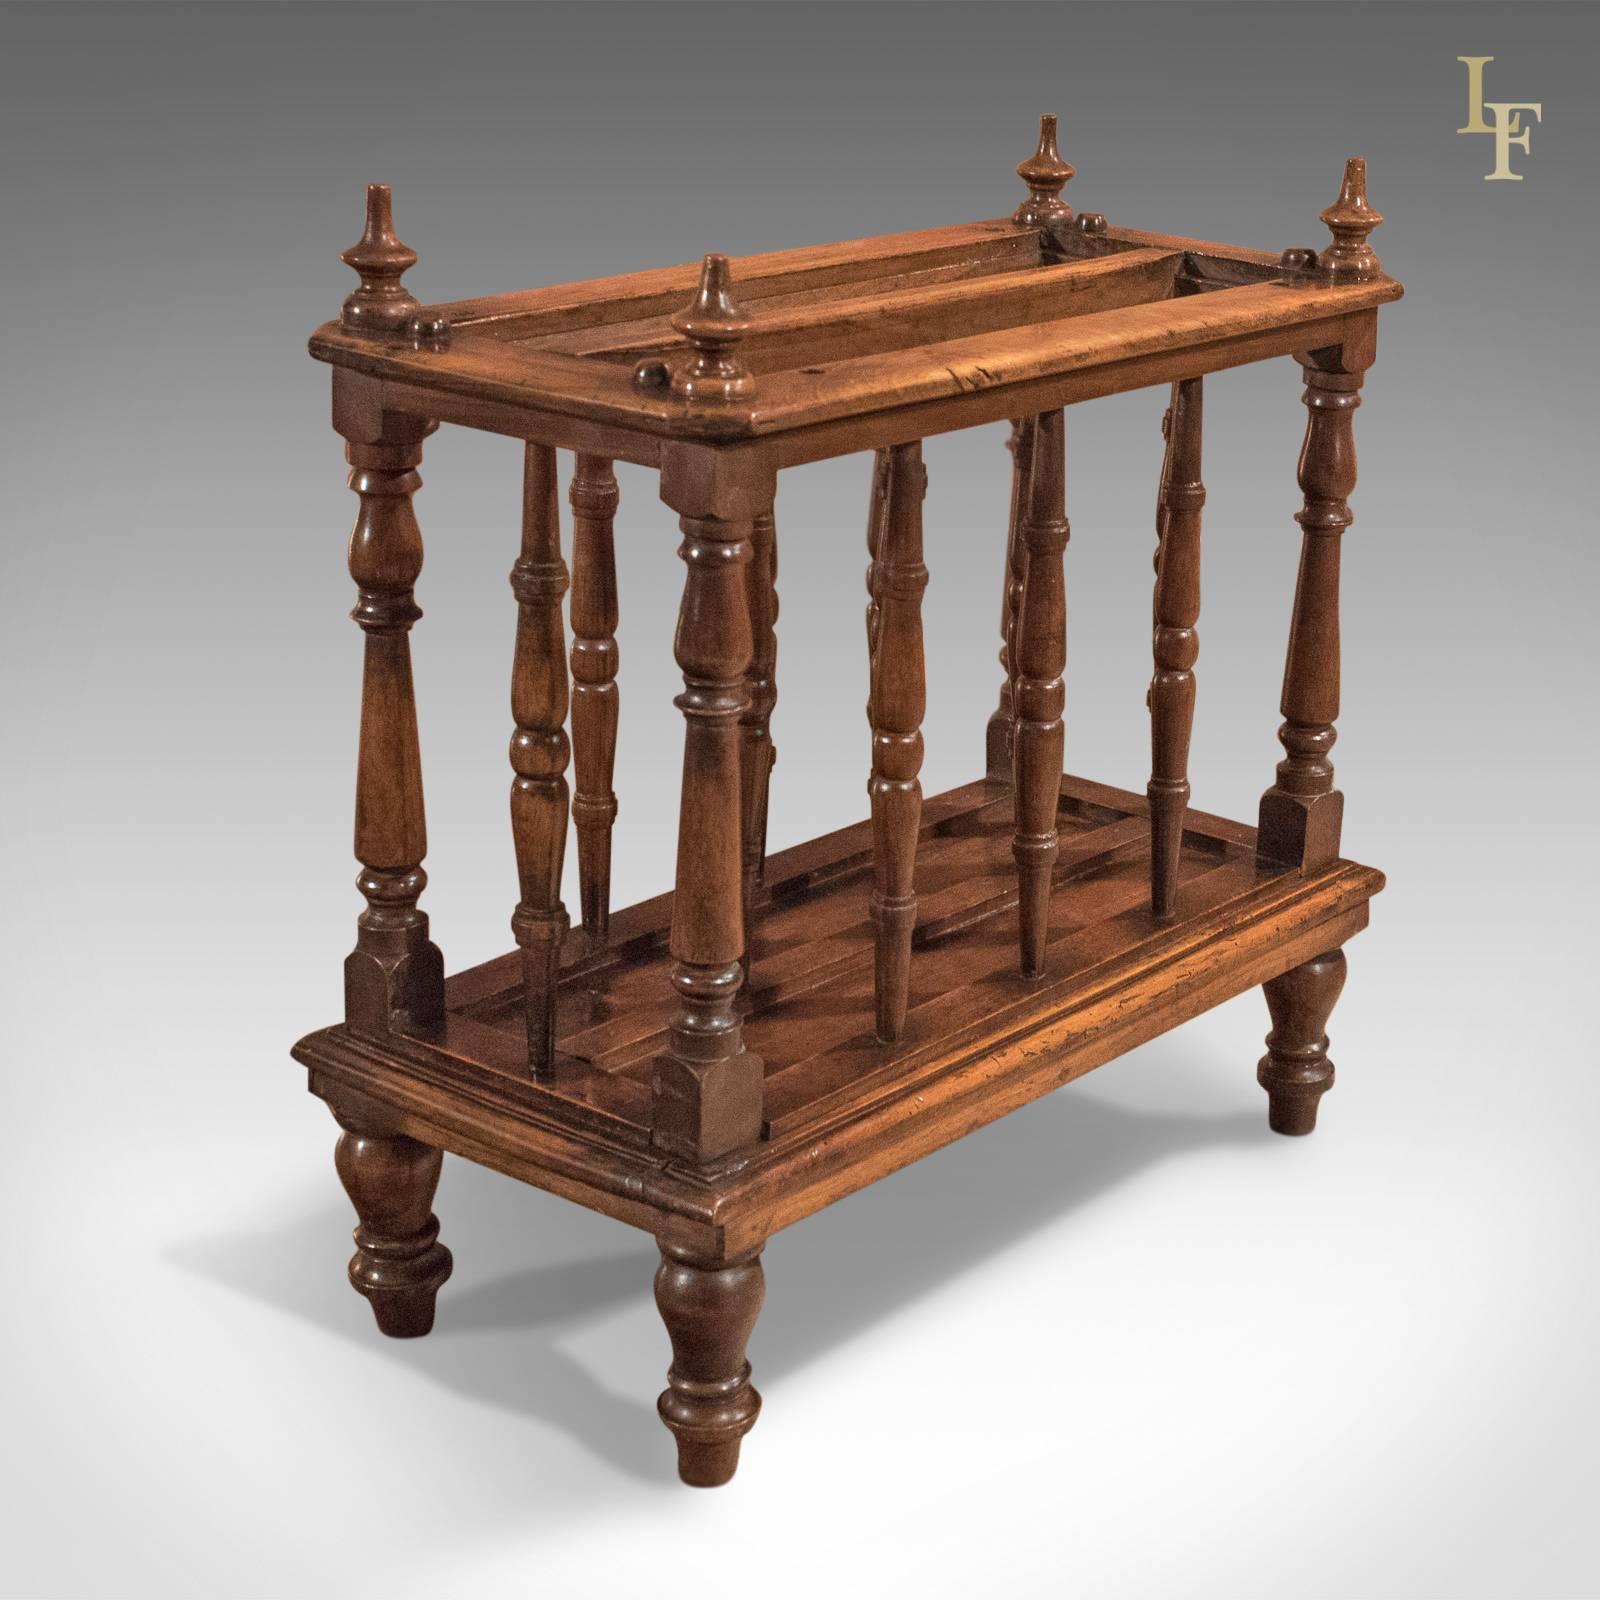 This is a super little antique Canterbury or club broadsheet rack dating to the mid-Victorian period, circa 1870.

Finished in well grained English walnut
Good colour and an aged patina
Raised on turned legs, lower platform finished with edge